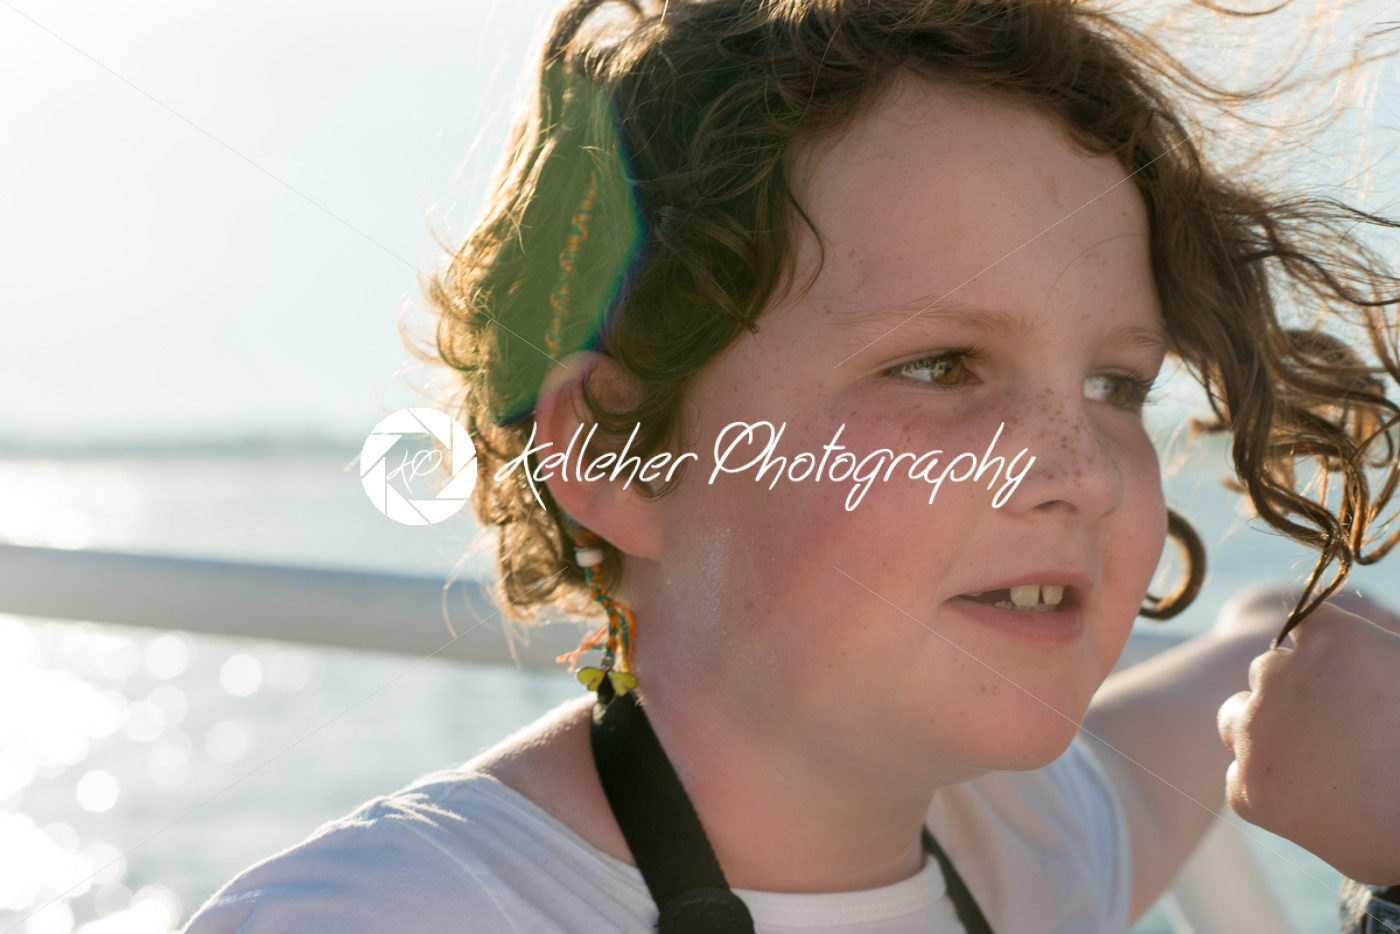 Beautiful young girl on boat at sunset with sun flare behind her - Kelleher Photography Store